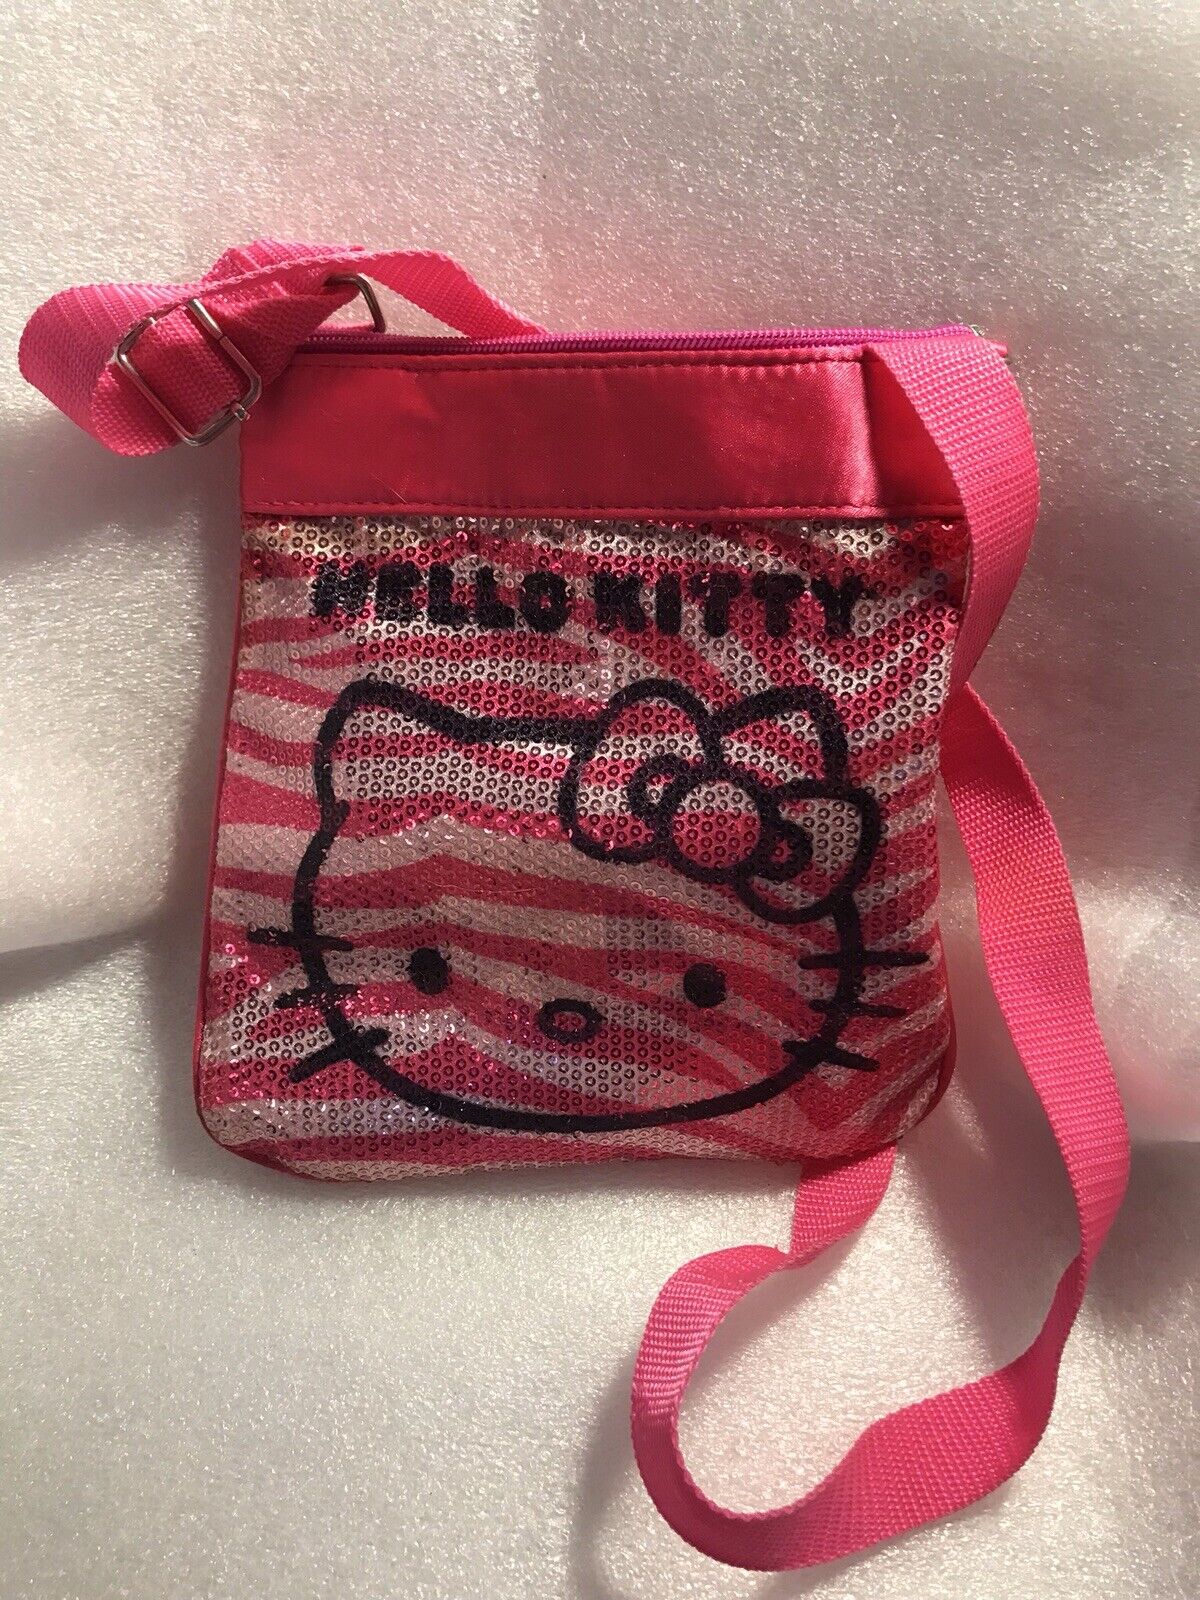 Sanrio Hello Kitty Pink Sequence Preowned Purse With Damaged Zipper